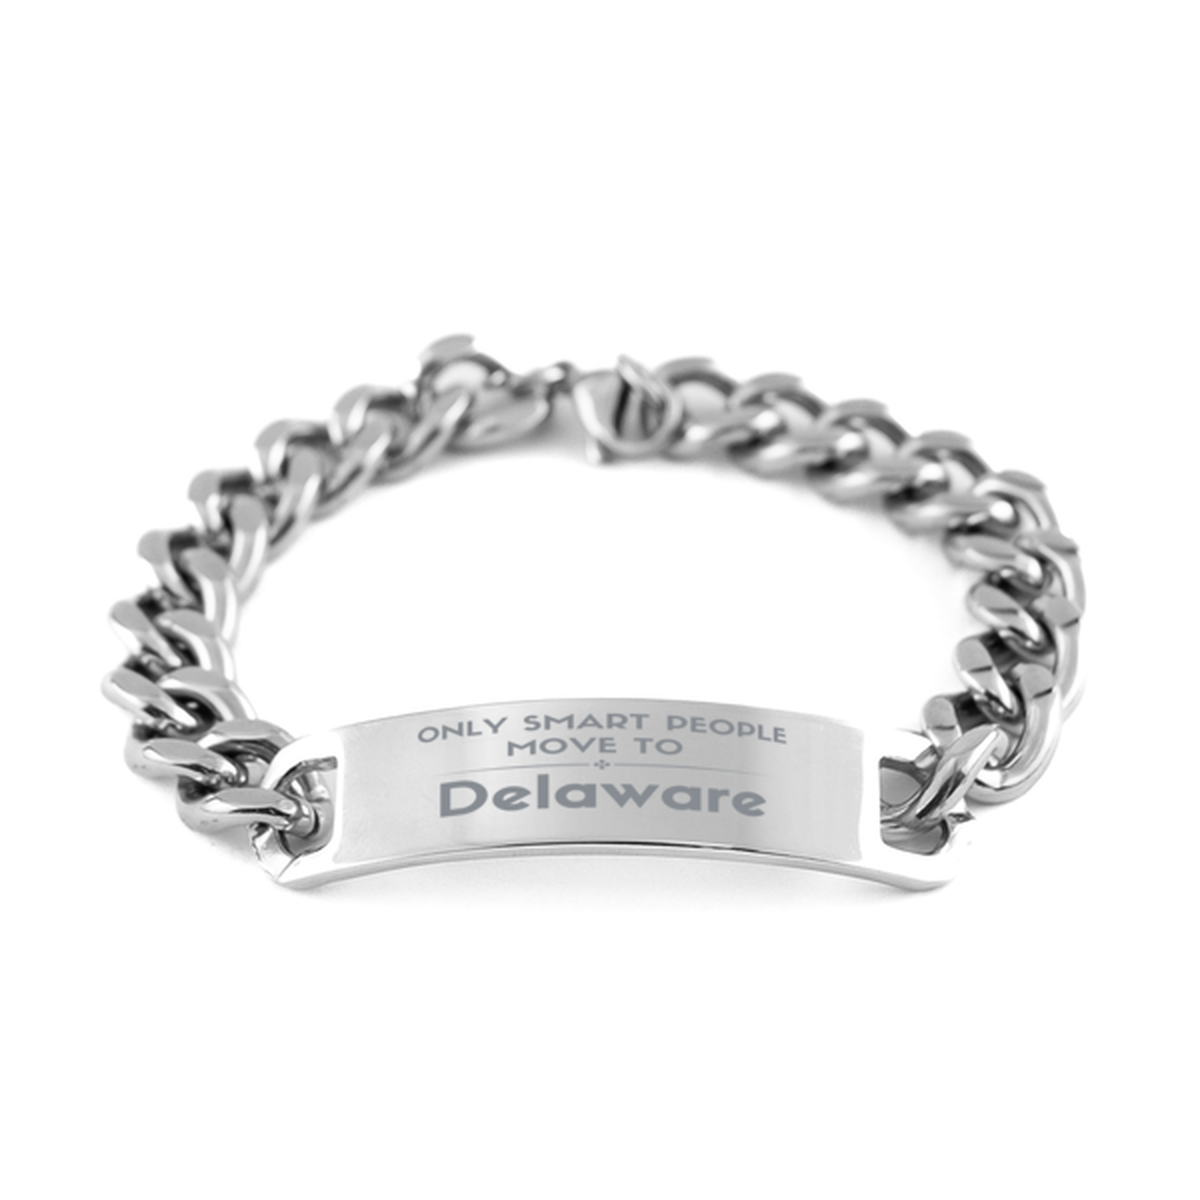 Only smart people move to Delaware Cuban Chain Stainless Steel Bracelet, Gag Gifts For Delaware, Move to Delaware Gifts for Friends Coworker Funny Saying Quote